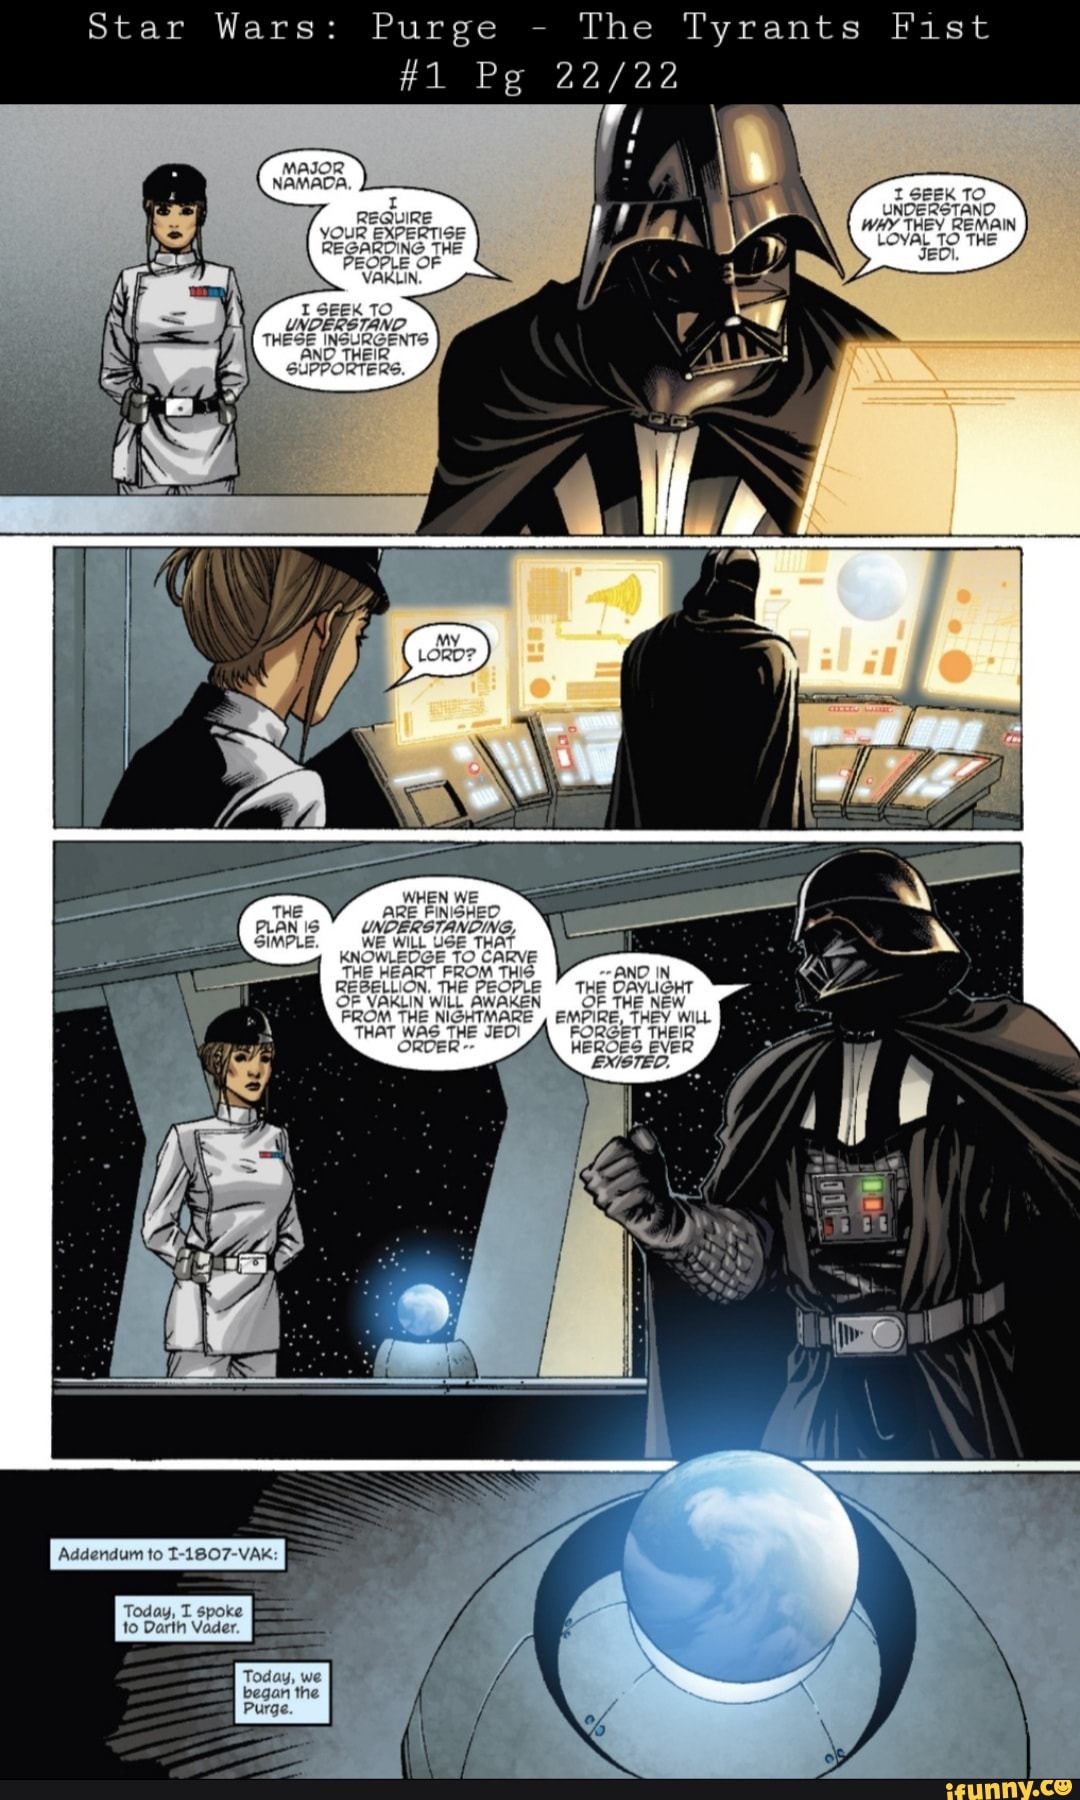 Star Wars: Purge - The Tyrants Fist #1 Pg MAJOR NAMADA, TAND. REQUIRE YOUR  EXPERTISE REGARDING THE